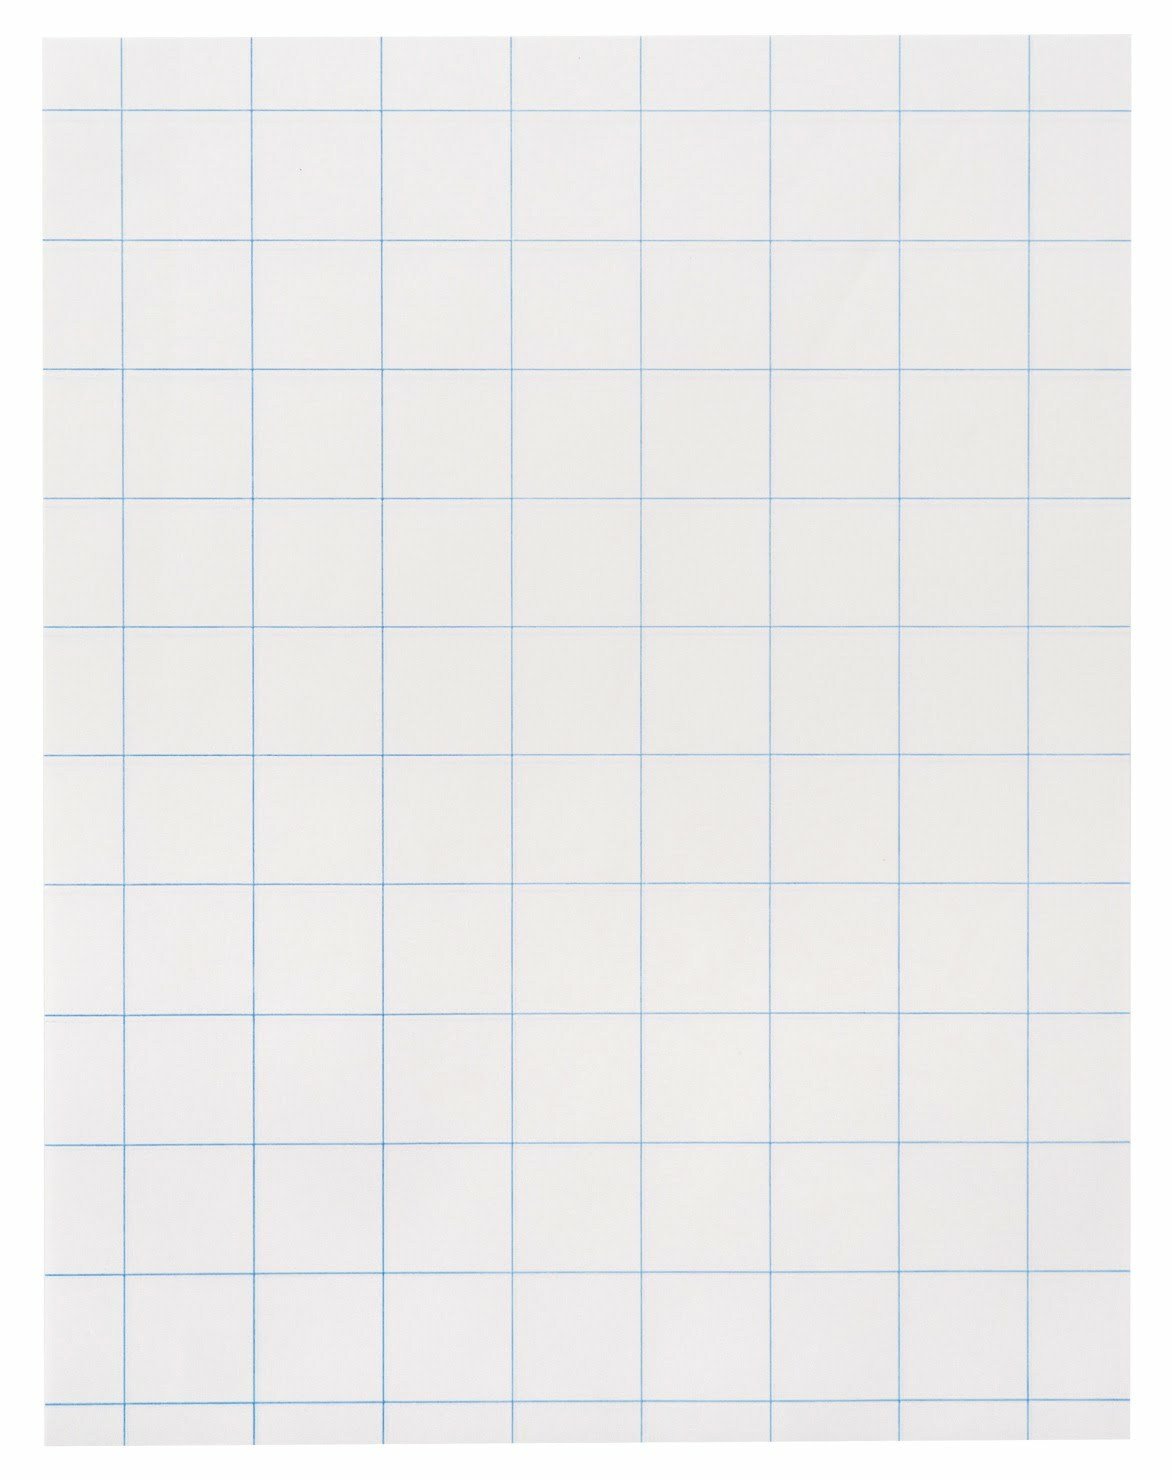 School Smart Double Sided Graph Paper  Letter Size   Lb   Inch